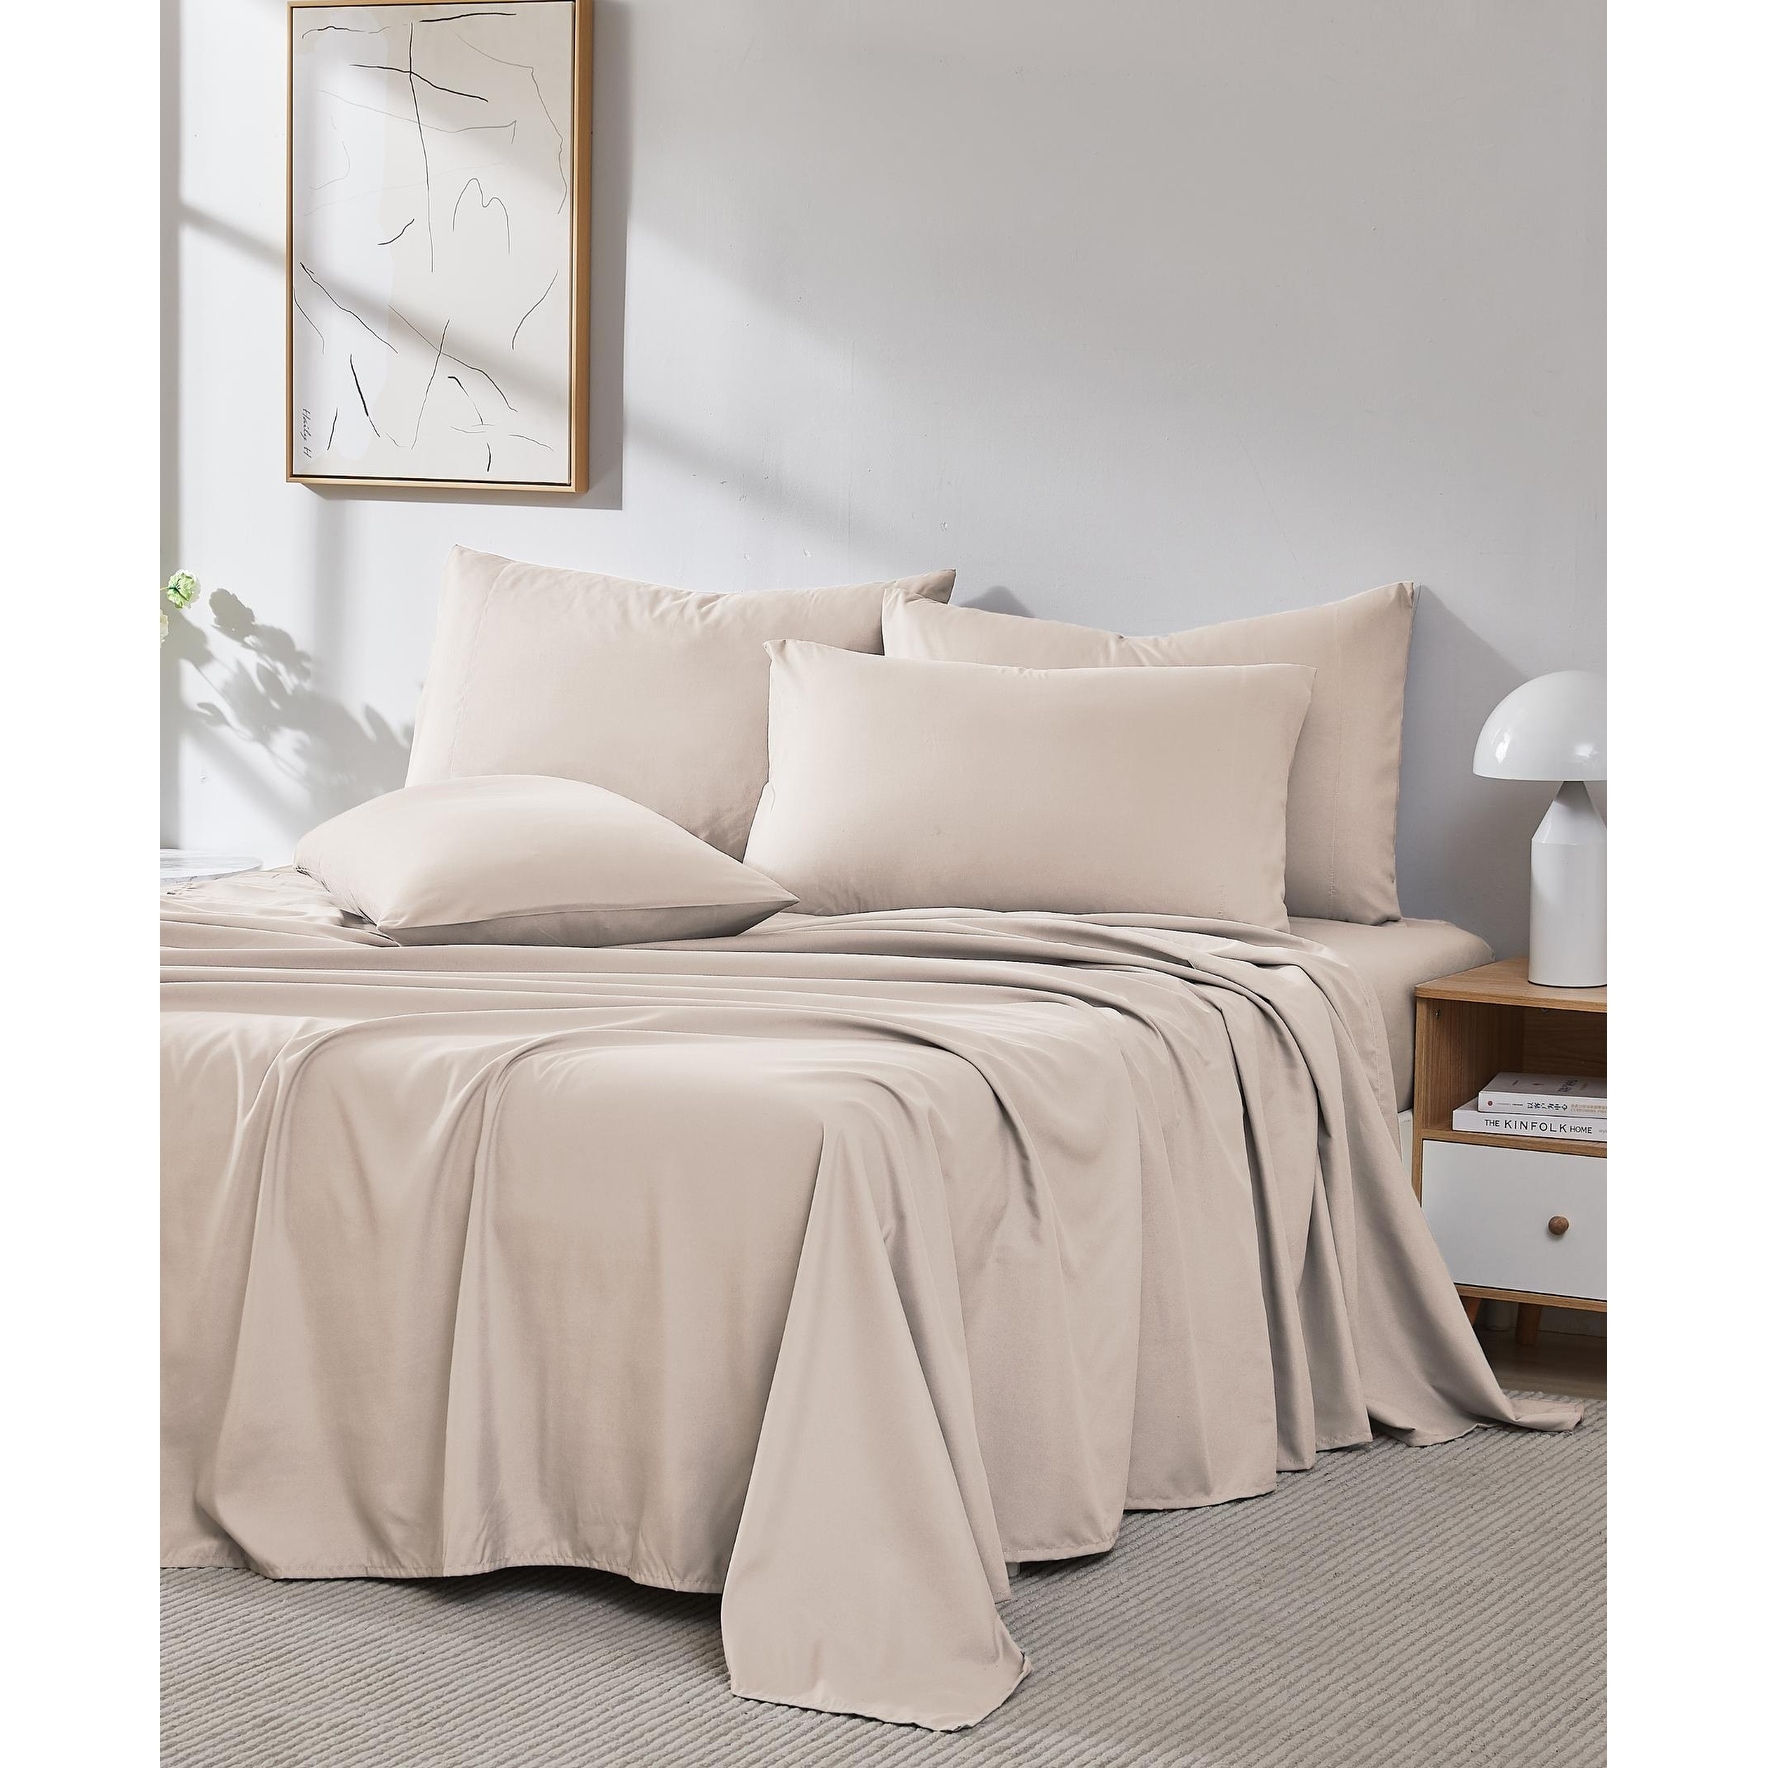 Empyrean Bedding Empyrean Extra Deep Fitted Sheets Twin Size - 24 Extra  Deep Fitted Sheets With Bonus 1 Pillowcase - 2 Piece Extra Deep Fitted Be